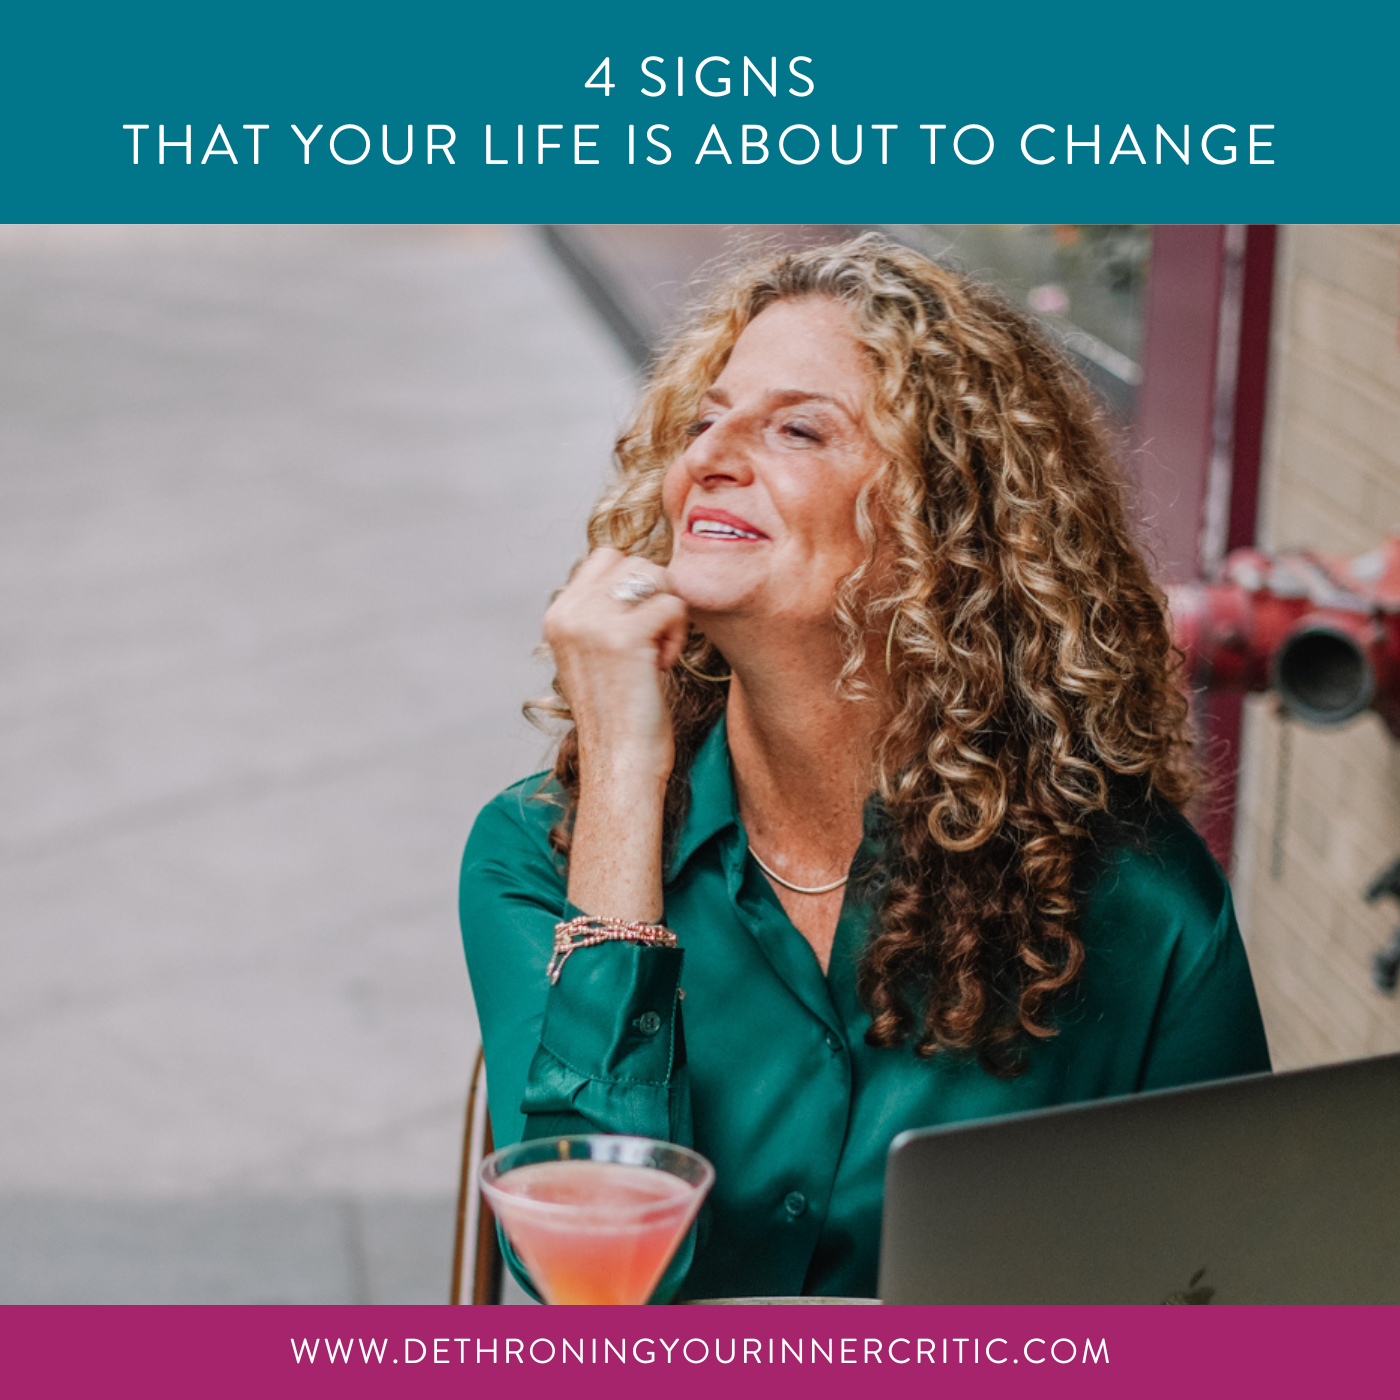 4 signs that your life is about to change